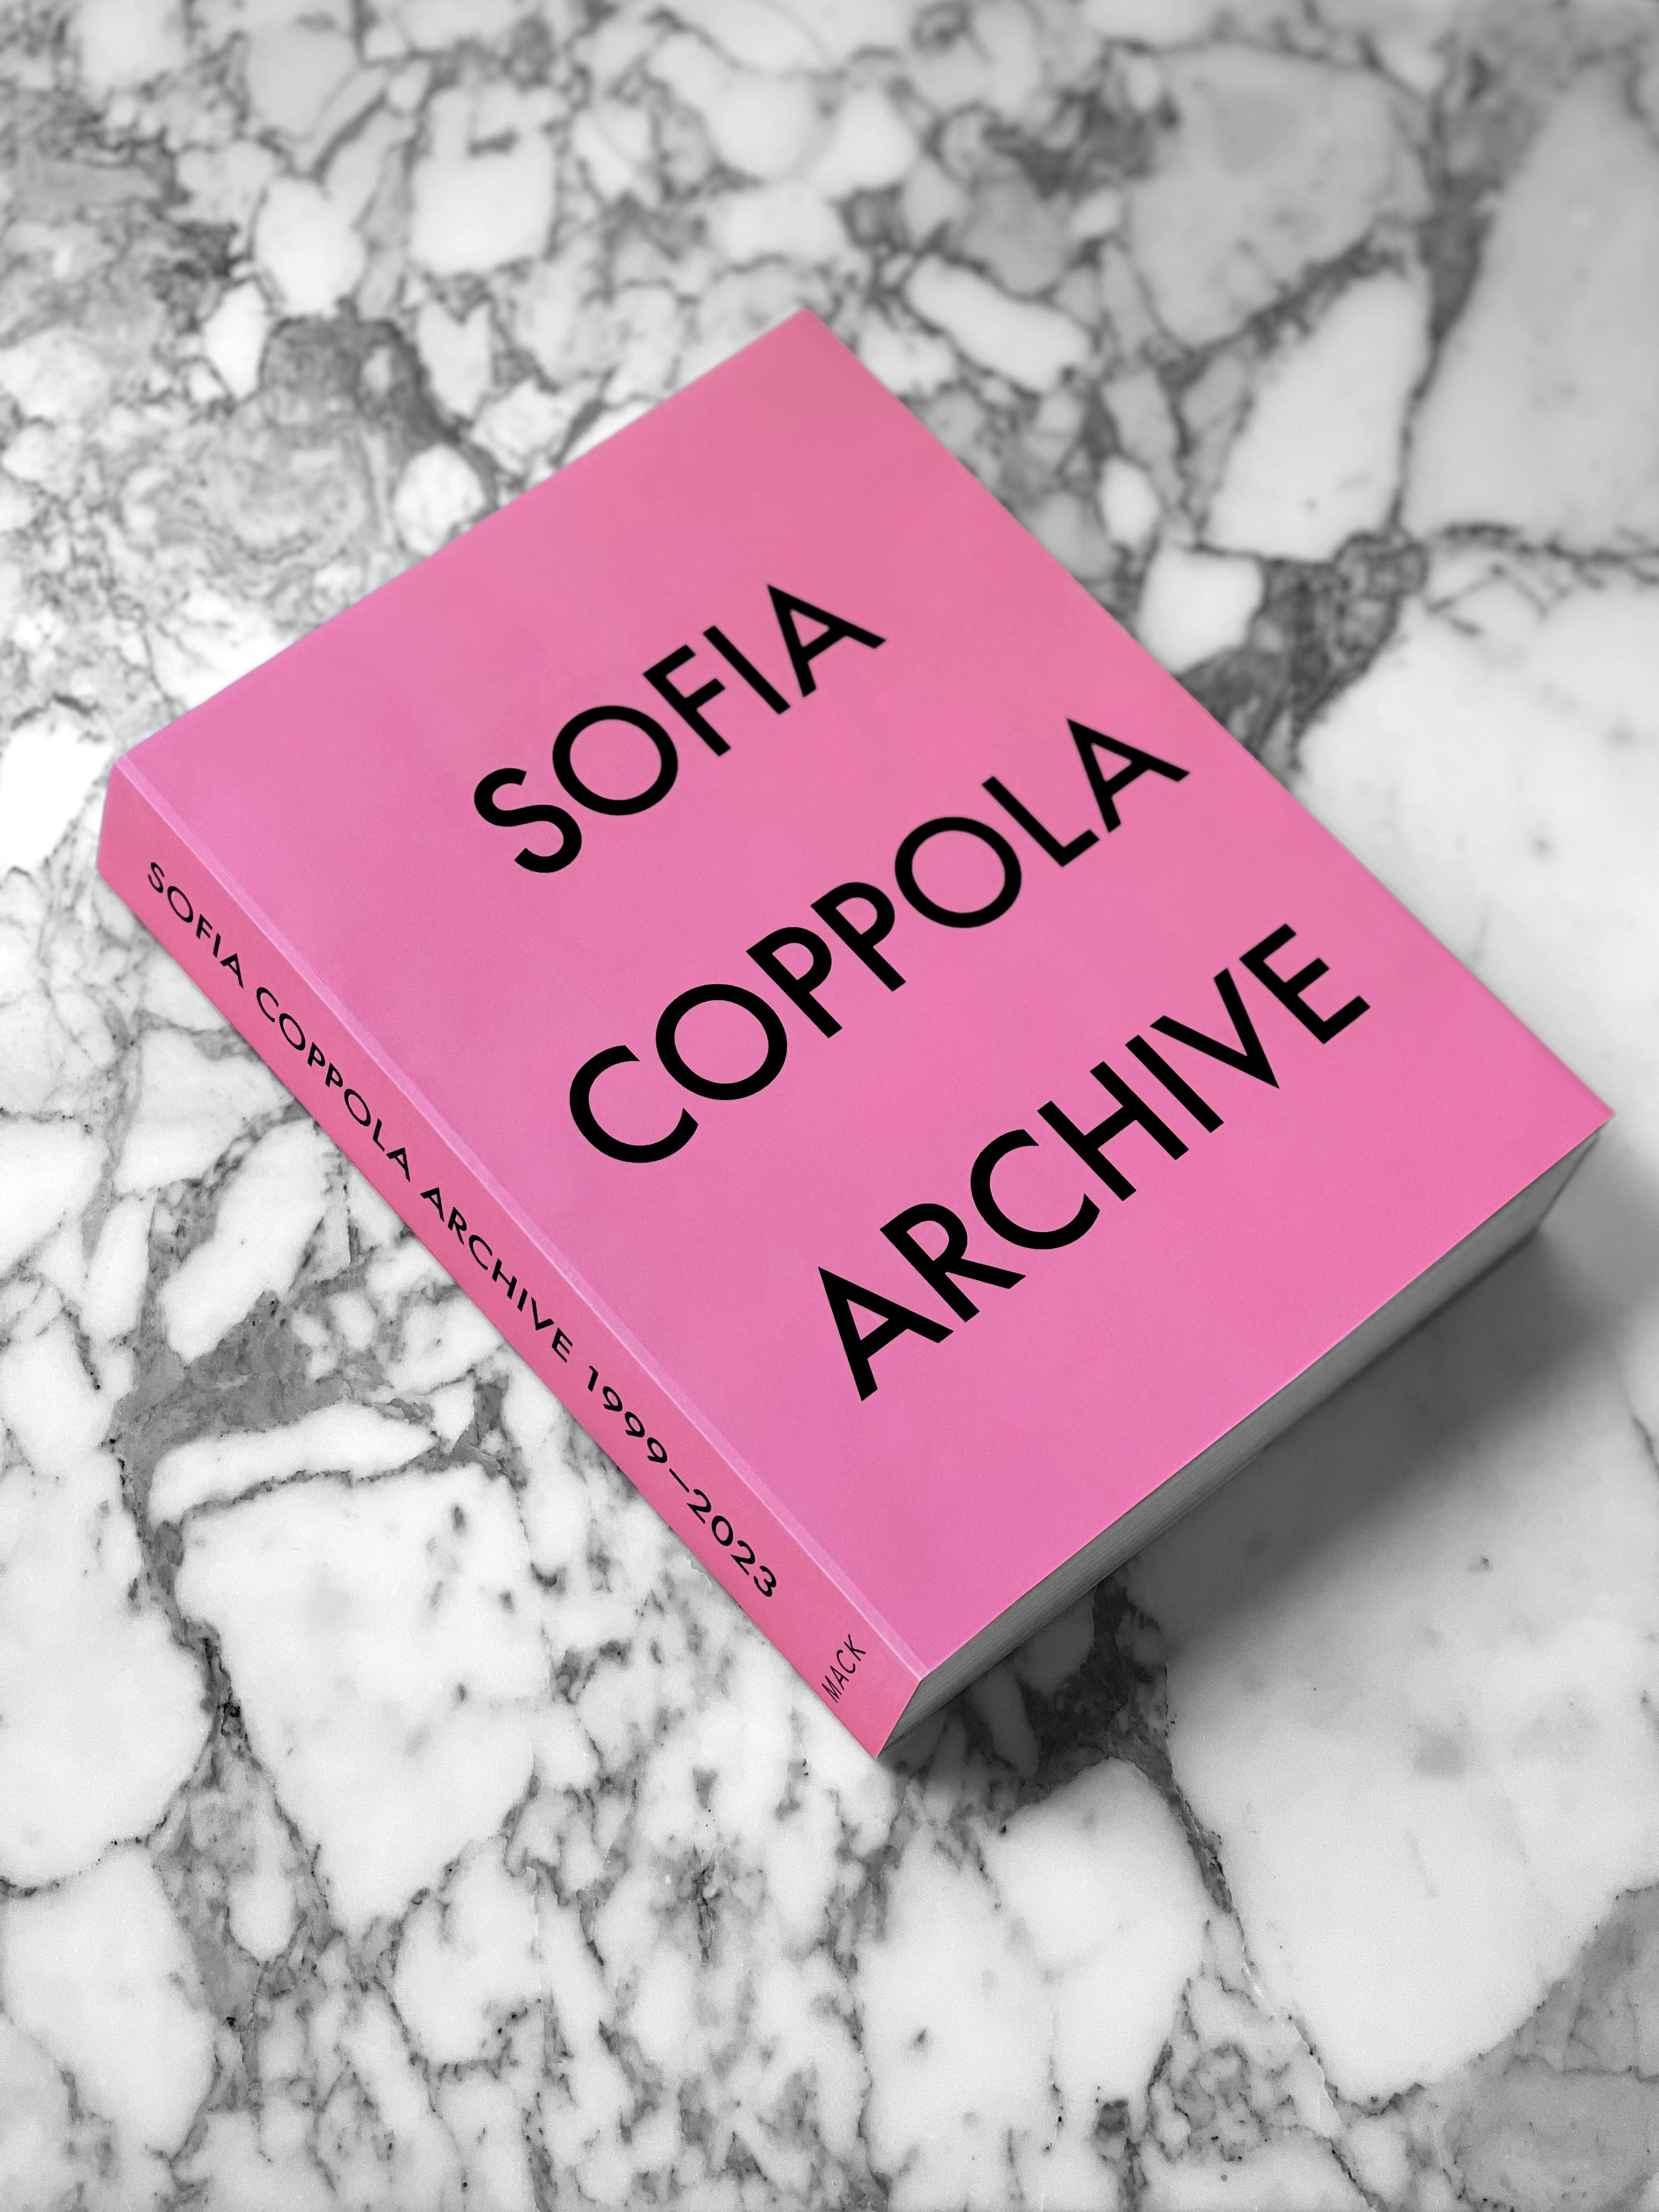 The much-anticipated Sofia Coppola Archive is here. A gorgeous